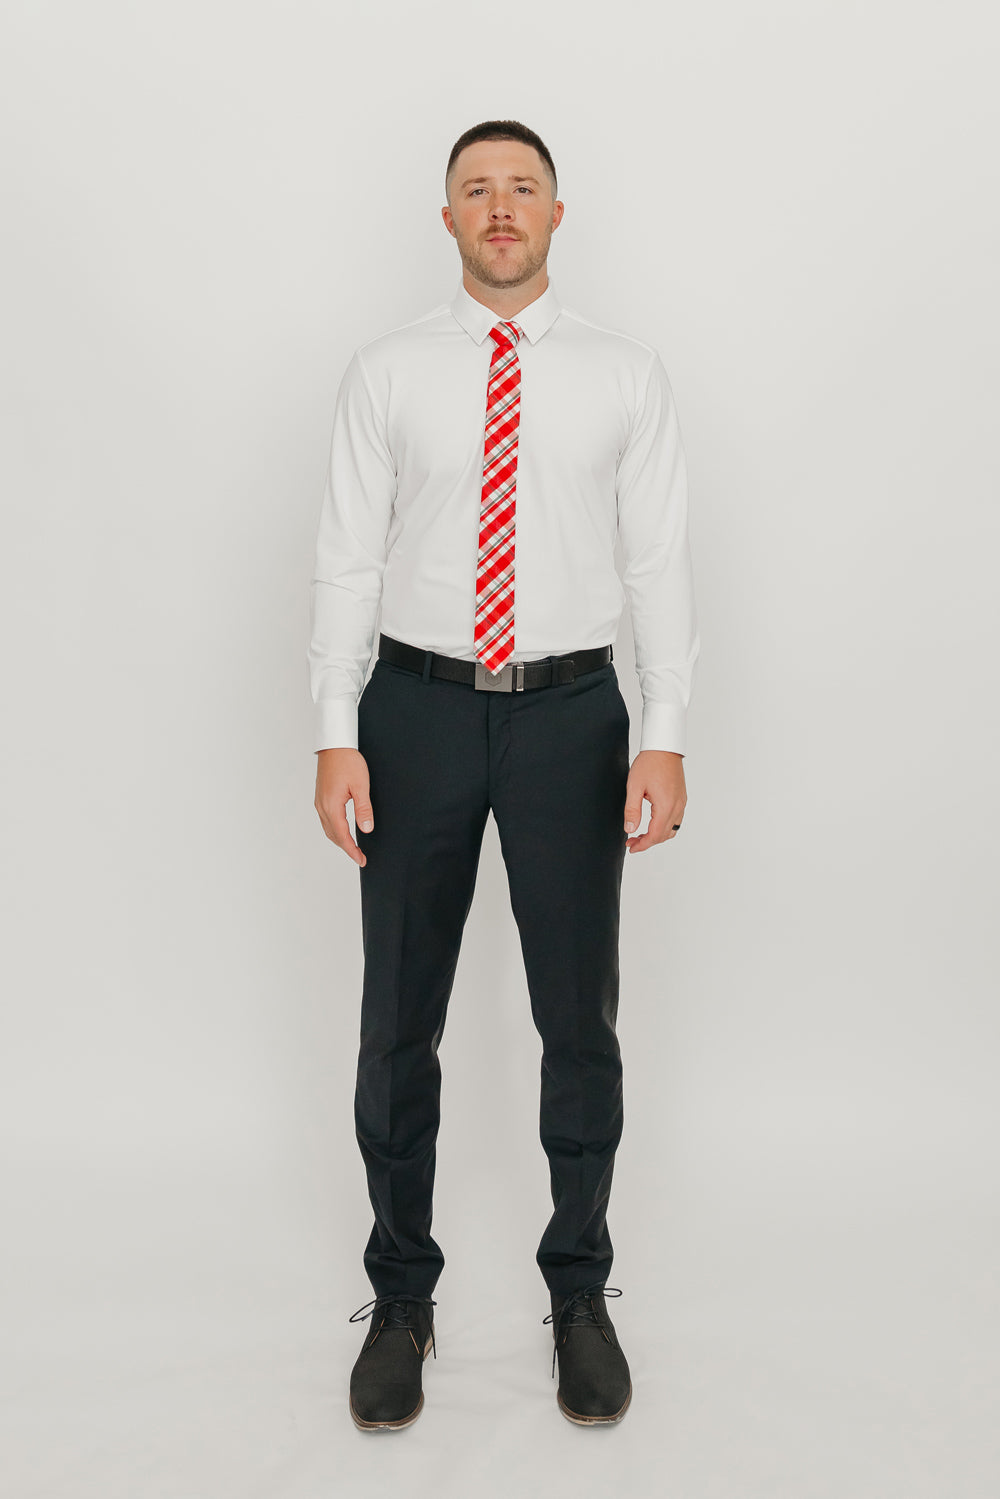 DAZI Wrapped Up Skinny Tie worn with a white shirt, black belt and black suit pants.